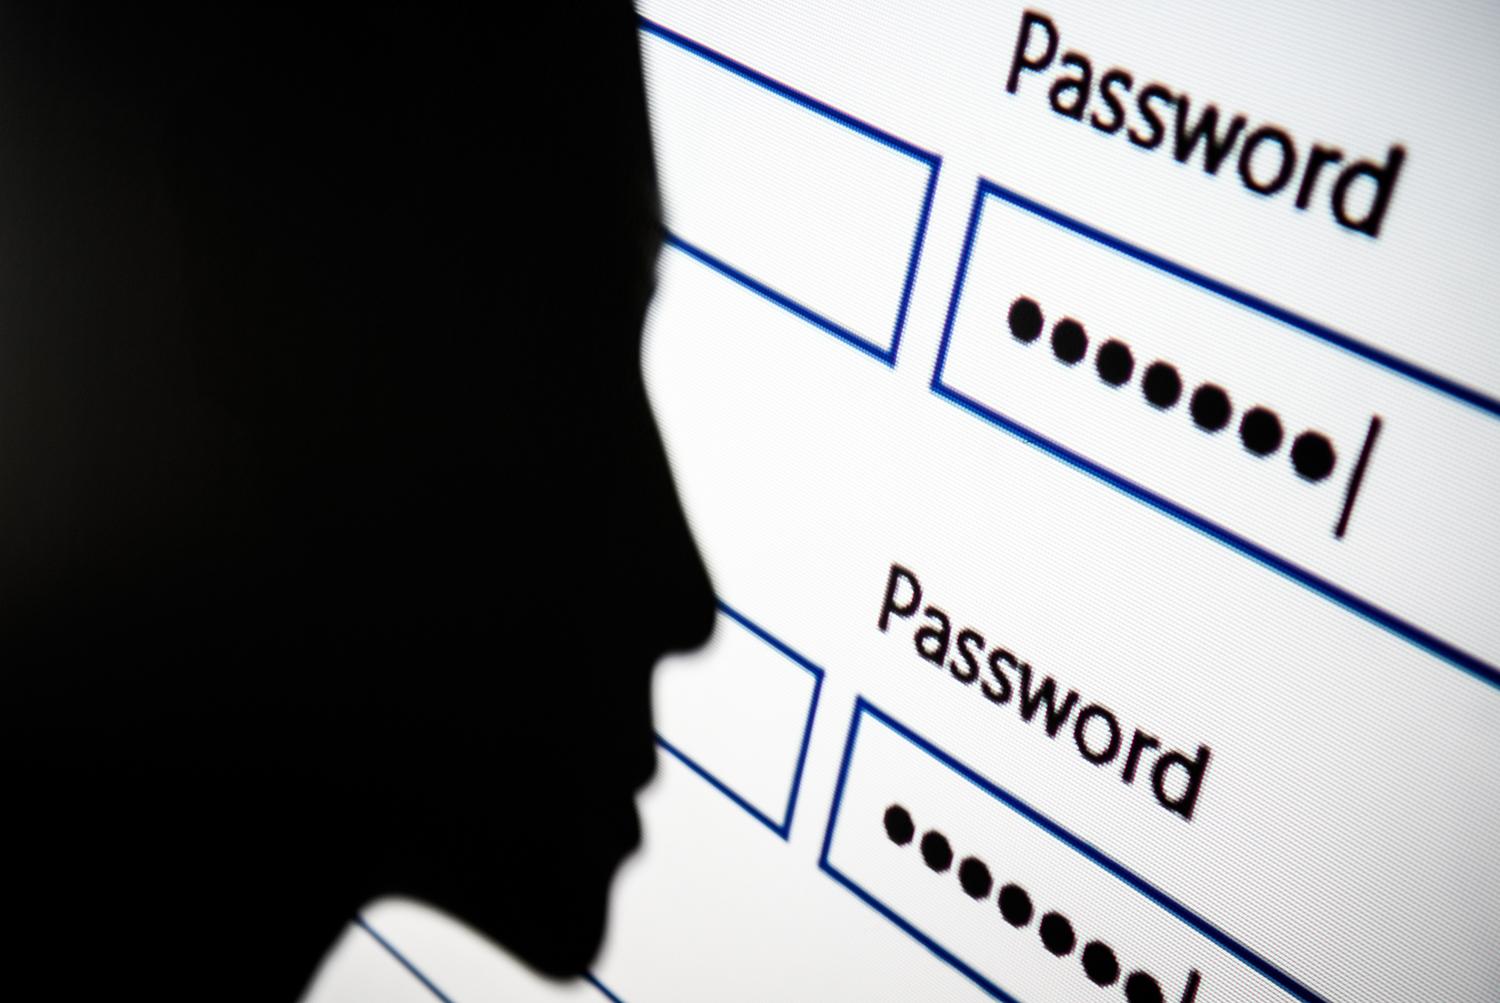 A woman is silhouetted against a projection of a password log-in dialog box on Aug. 9, 2017, in London. (Photo by Leon Neal/Getty Images)